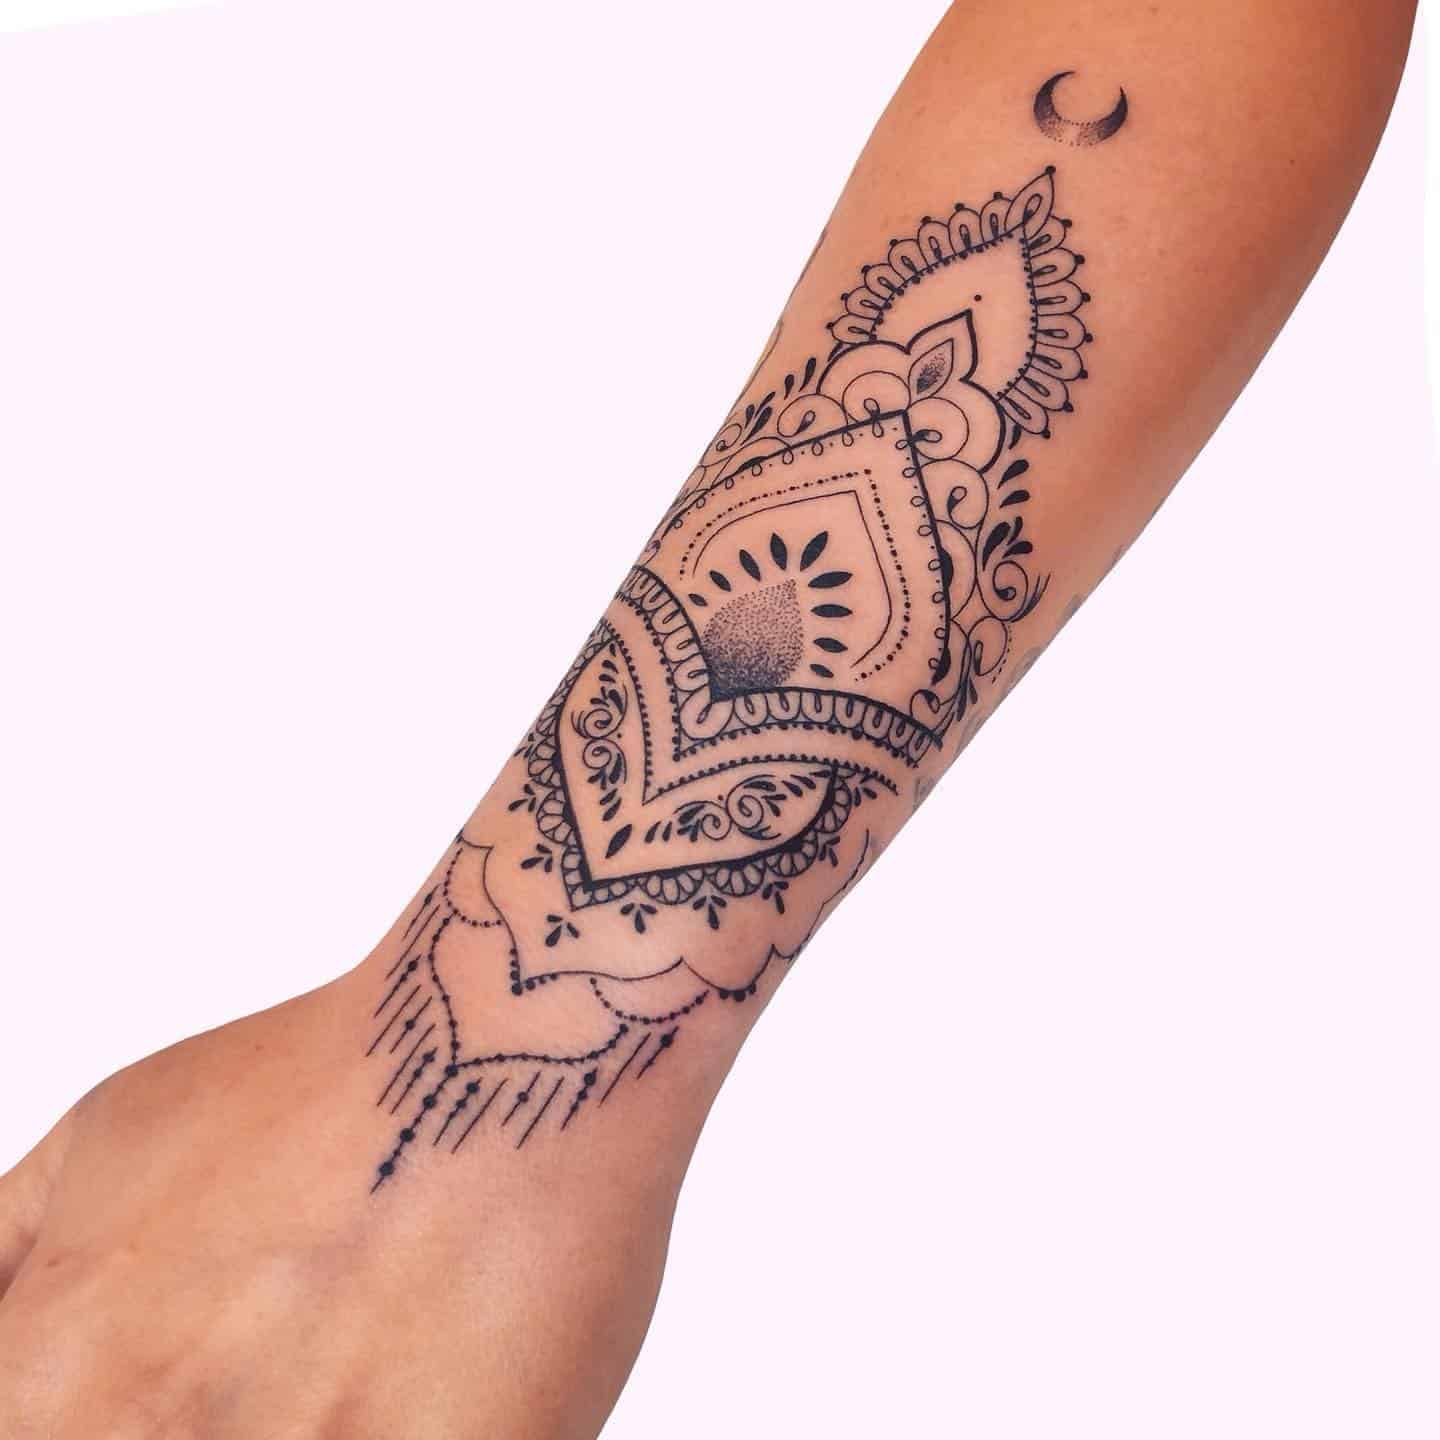 70 Best Tattoo Ideas to Inspire You